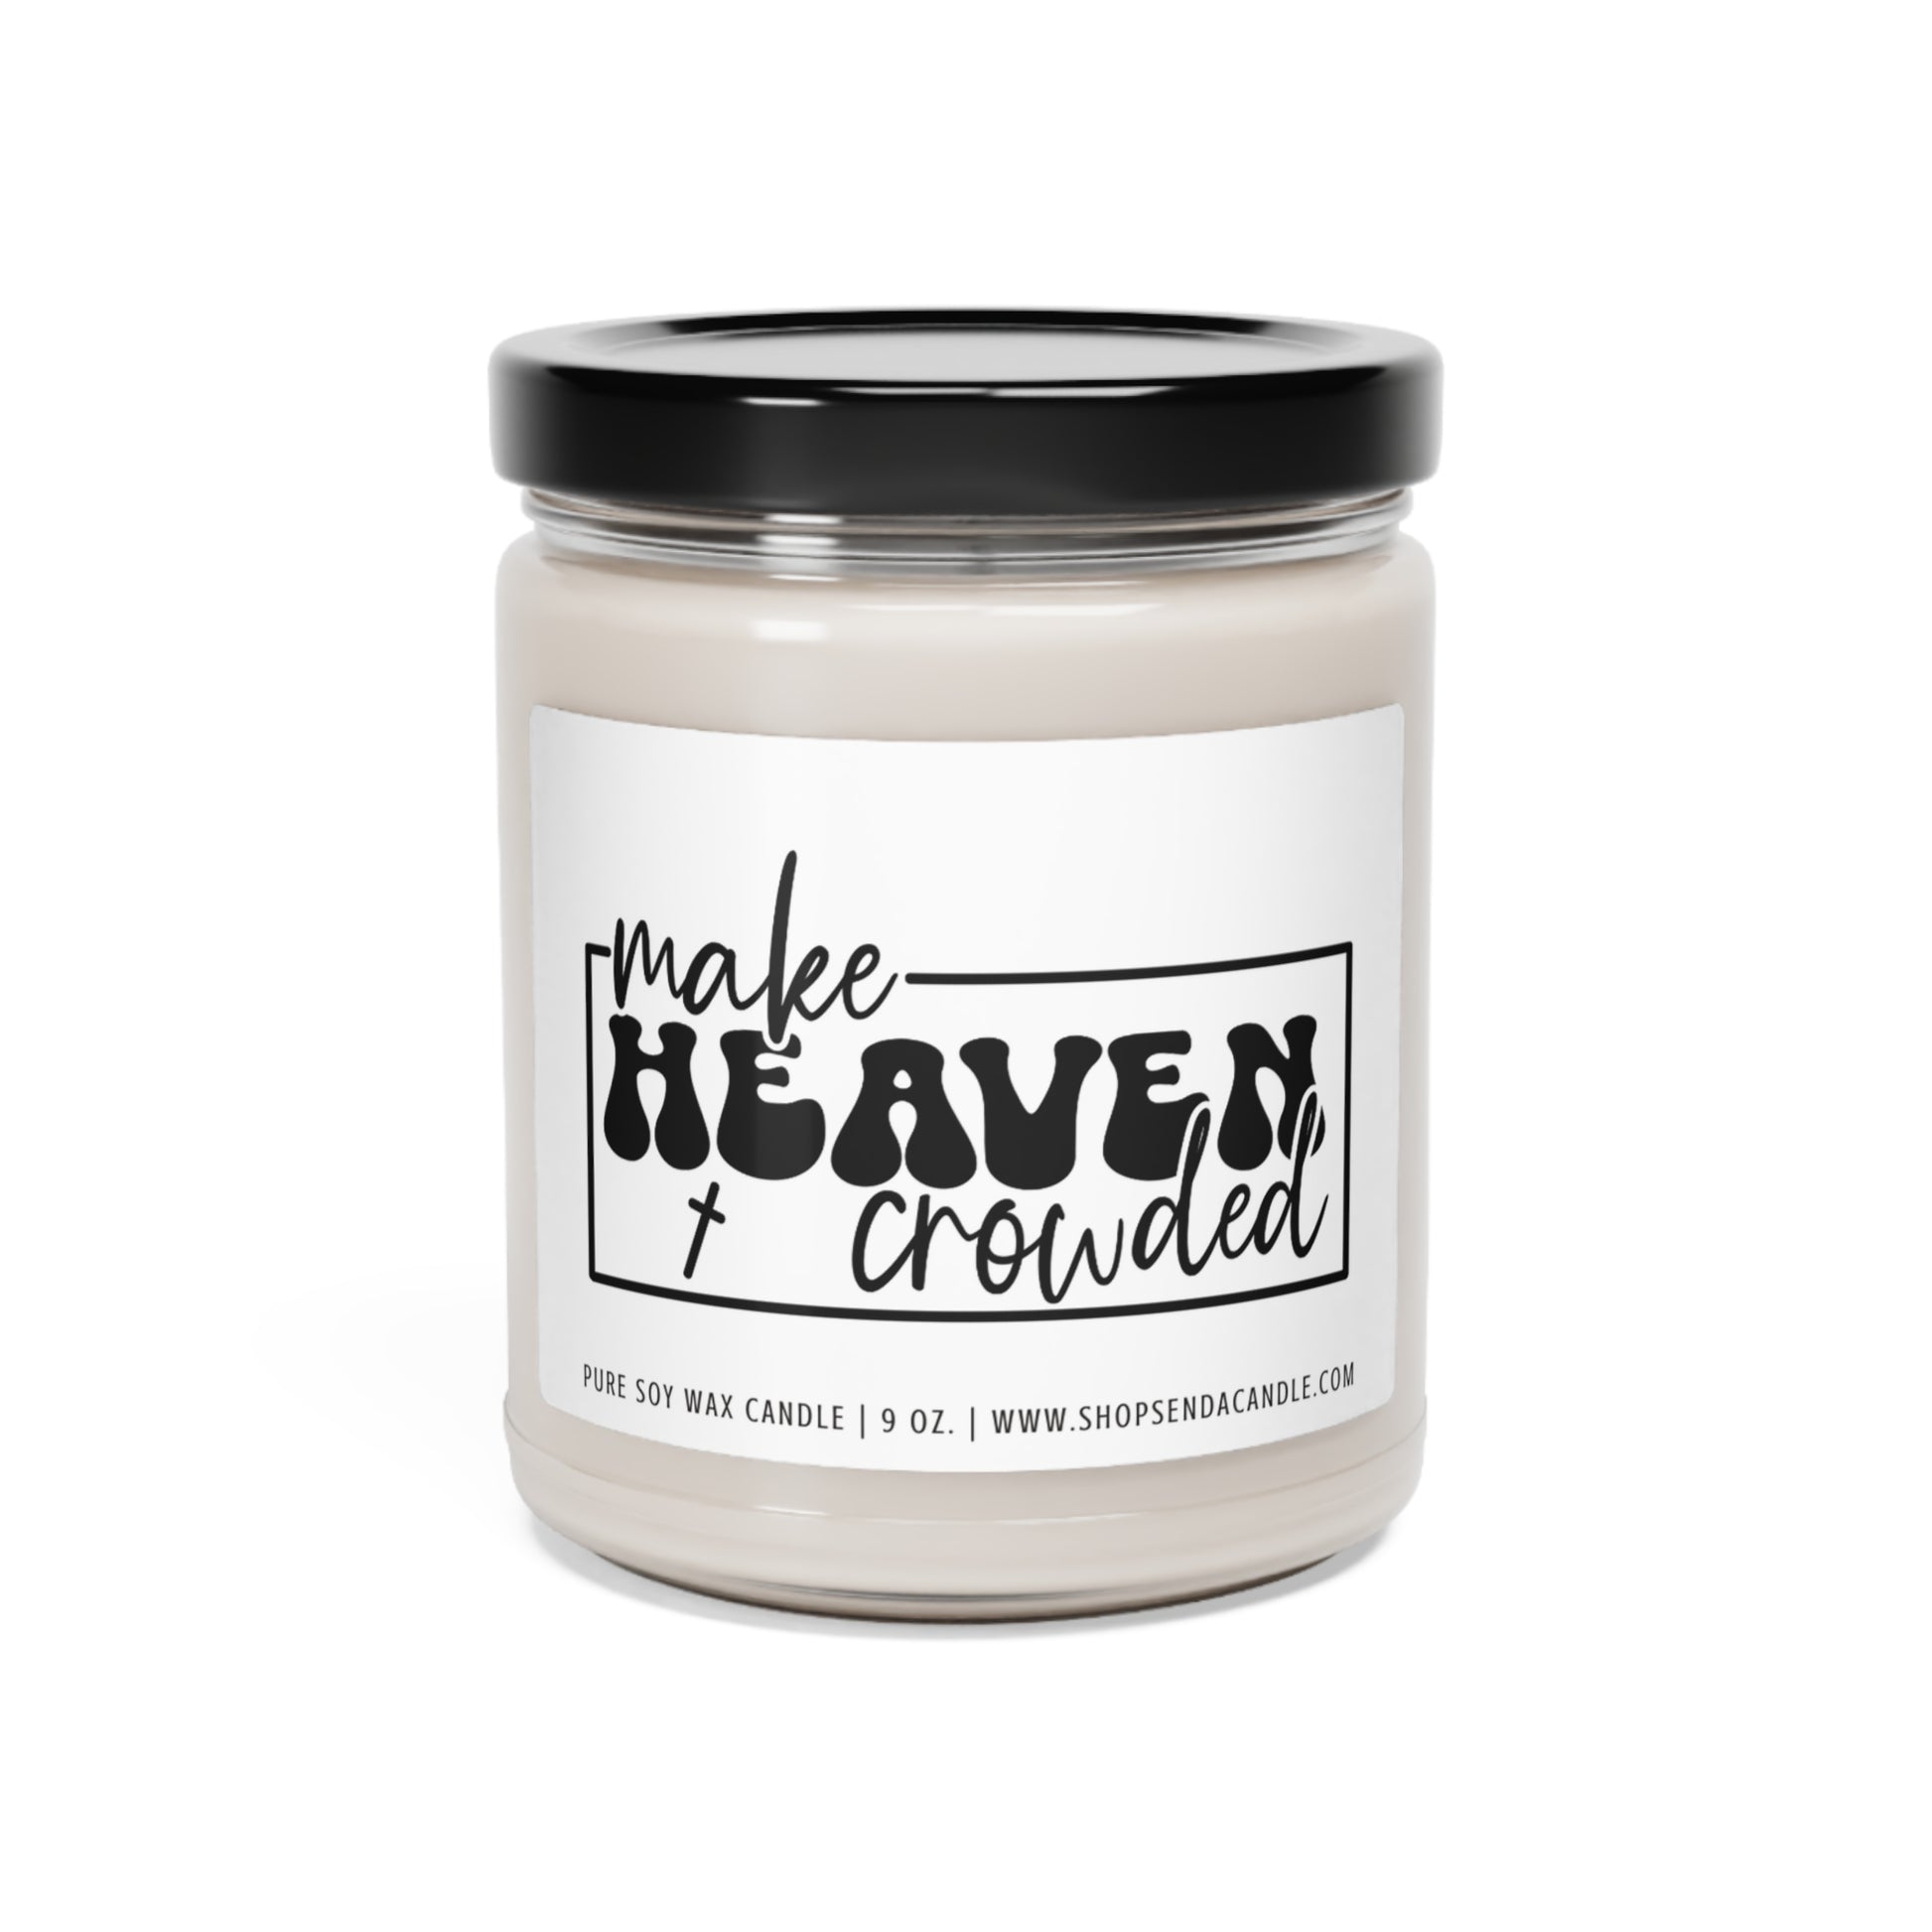 Christian Gift Ideas For Women | Send A Candle